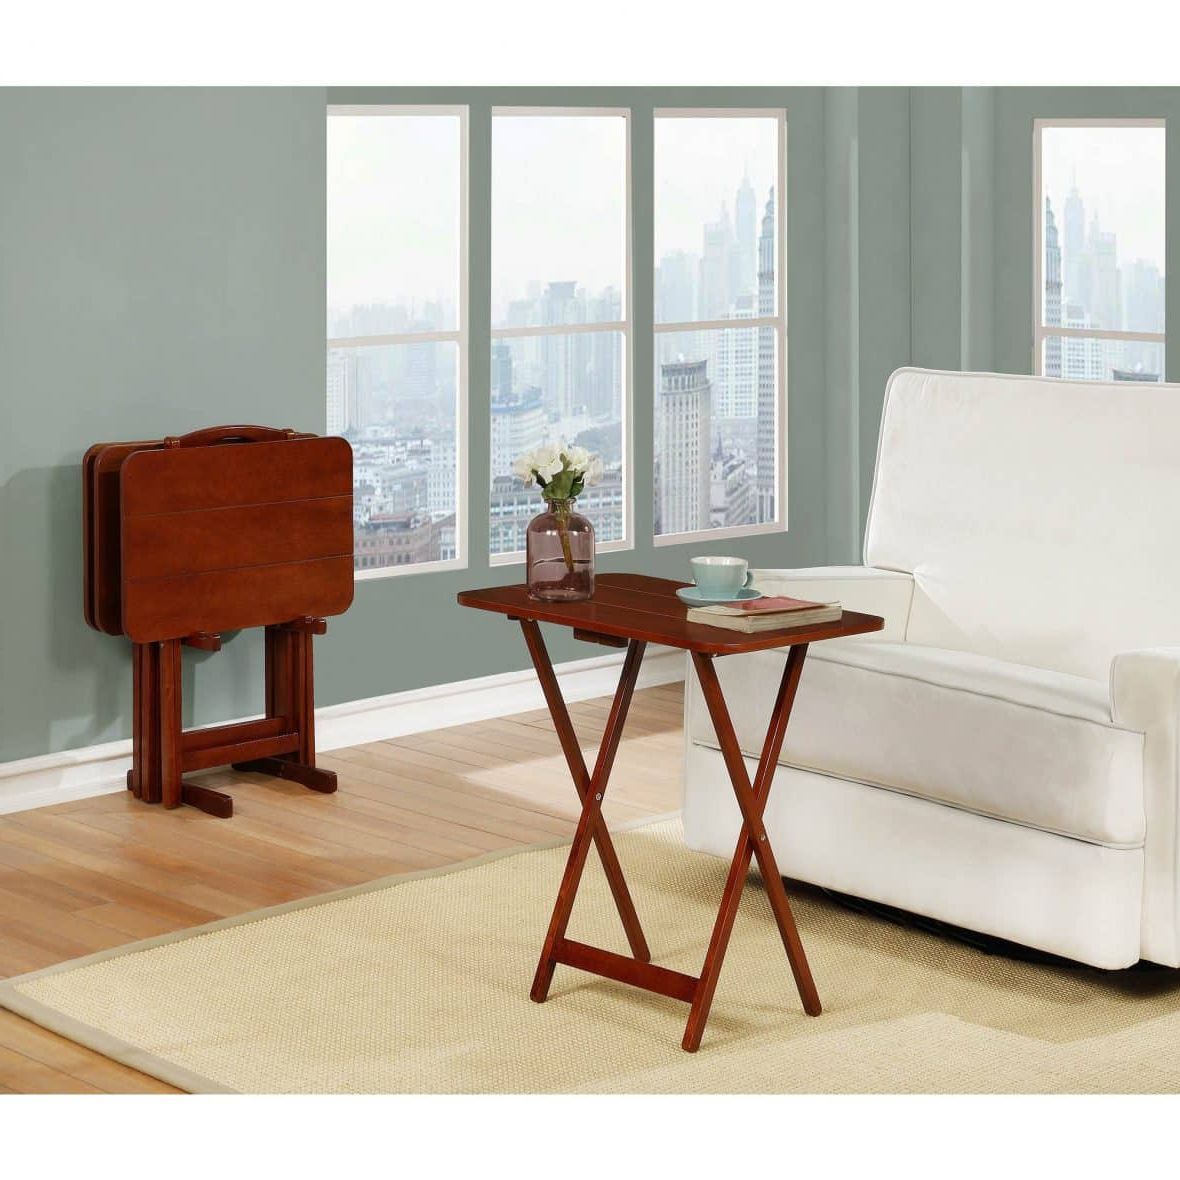 Fashionable Bjs Tv Stands For Wood 5 Pc. Snack Tray Set $29.99 (Photo 10 of 20)